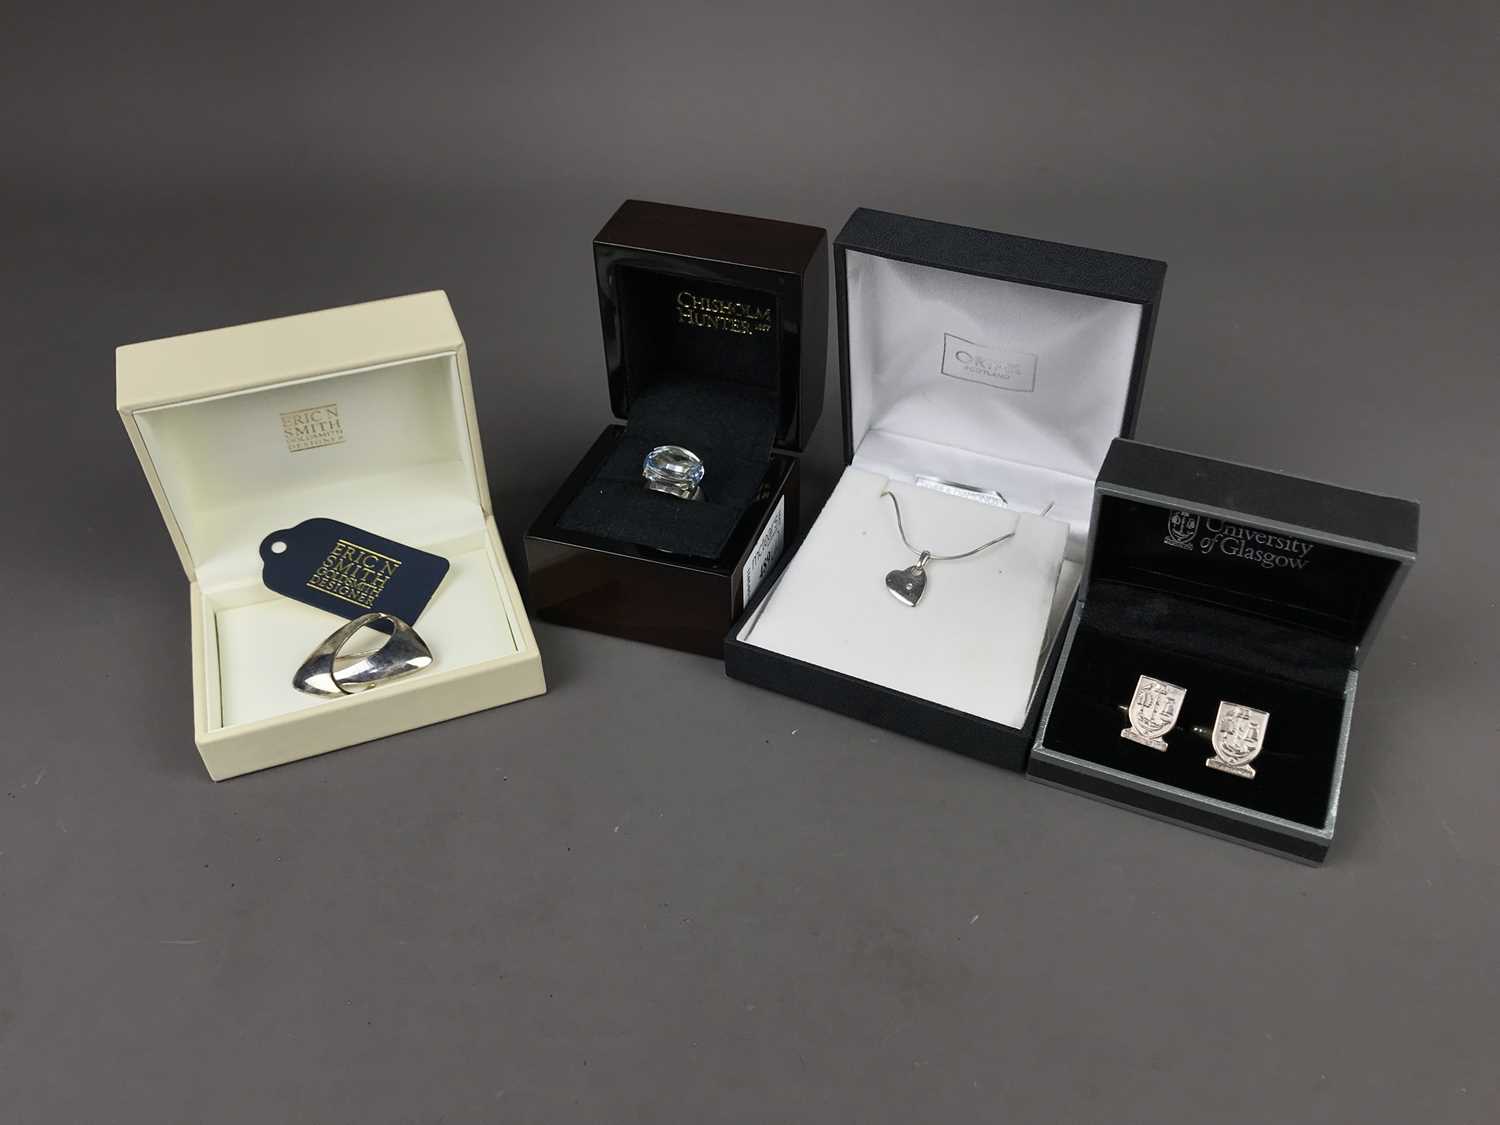 Lot 489 - A PAIR OF UNIVERSITY OF GLASGOW SILVER CUFFLINKS, AN ERIC SMITH BROOCH AND A PENDANT